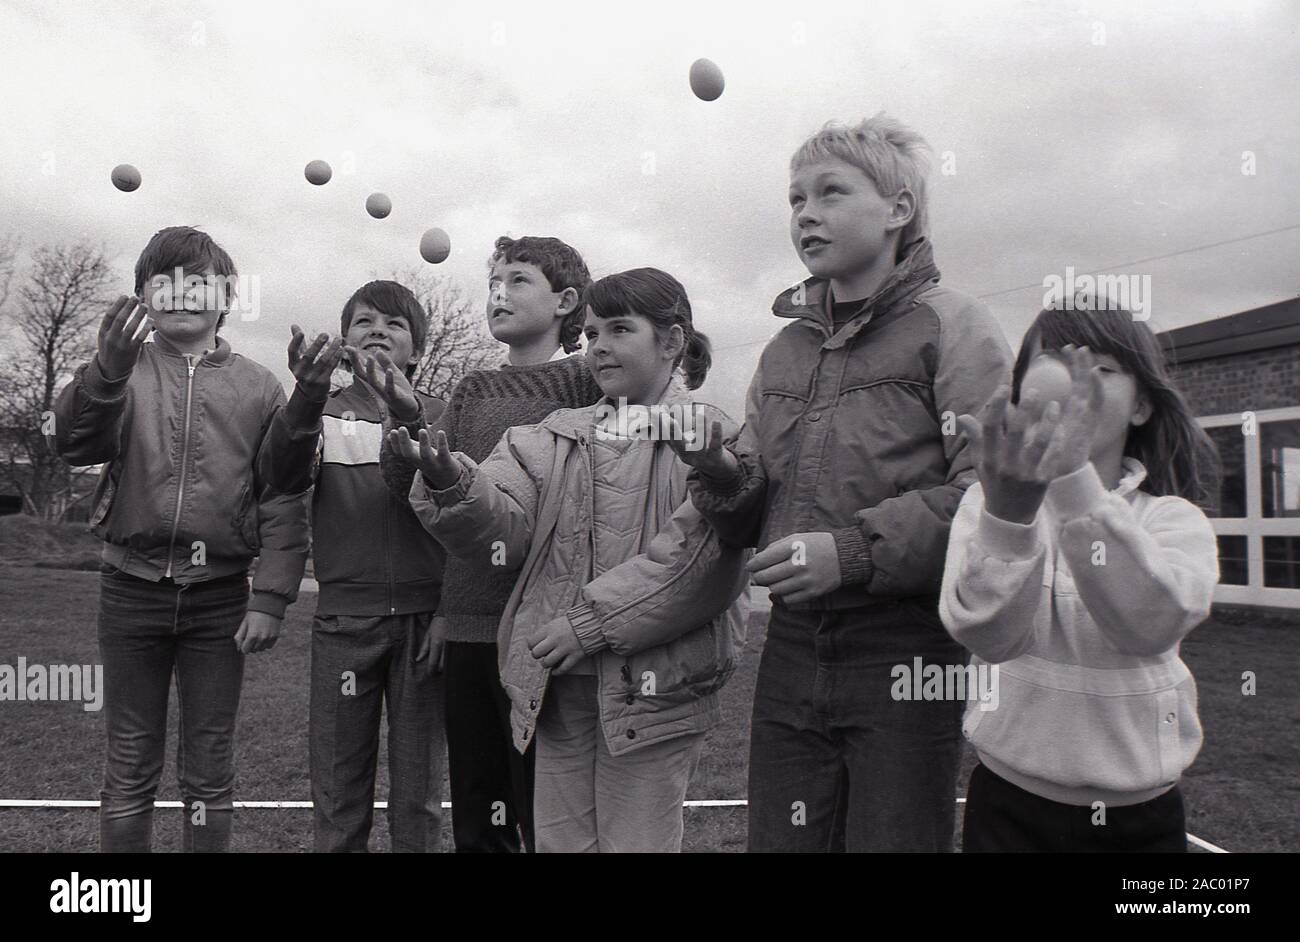 1980s, historical, children practising throwing and catching an egg i preparation for the traditional egg throwing competition, England, UK.  Egg throwing is a two person activity requiring distance lobbing and the ability to catch. Each team member begins by standing ten metres apart, spreading out after each successful catch. But....drop or break the egg and you are out!  It is believed that egg throwing first occurred in the 1300s, gradually becoming an informal sport called the 'egg toss', played at country fairs and fetes. Stock Photo